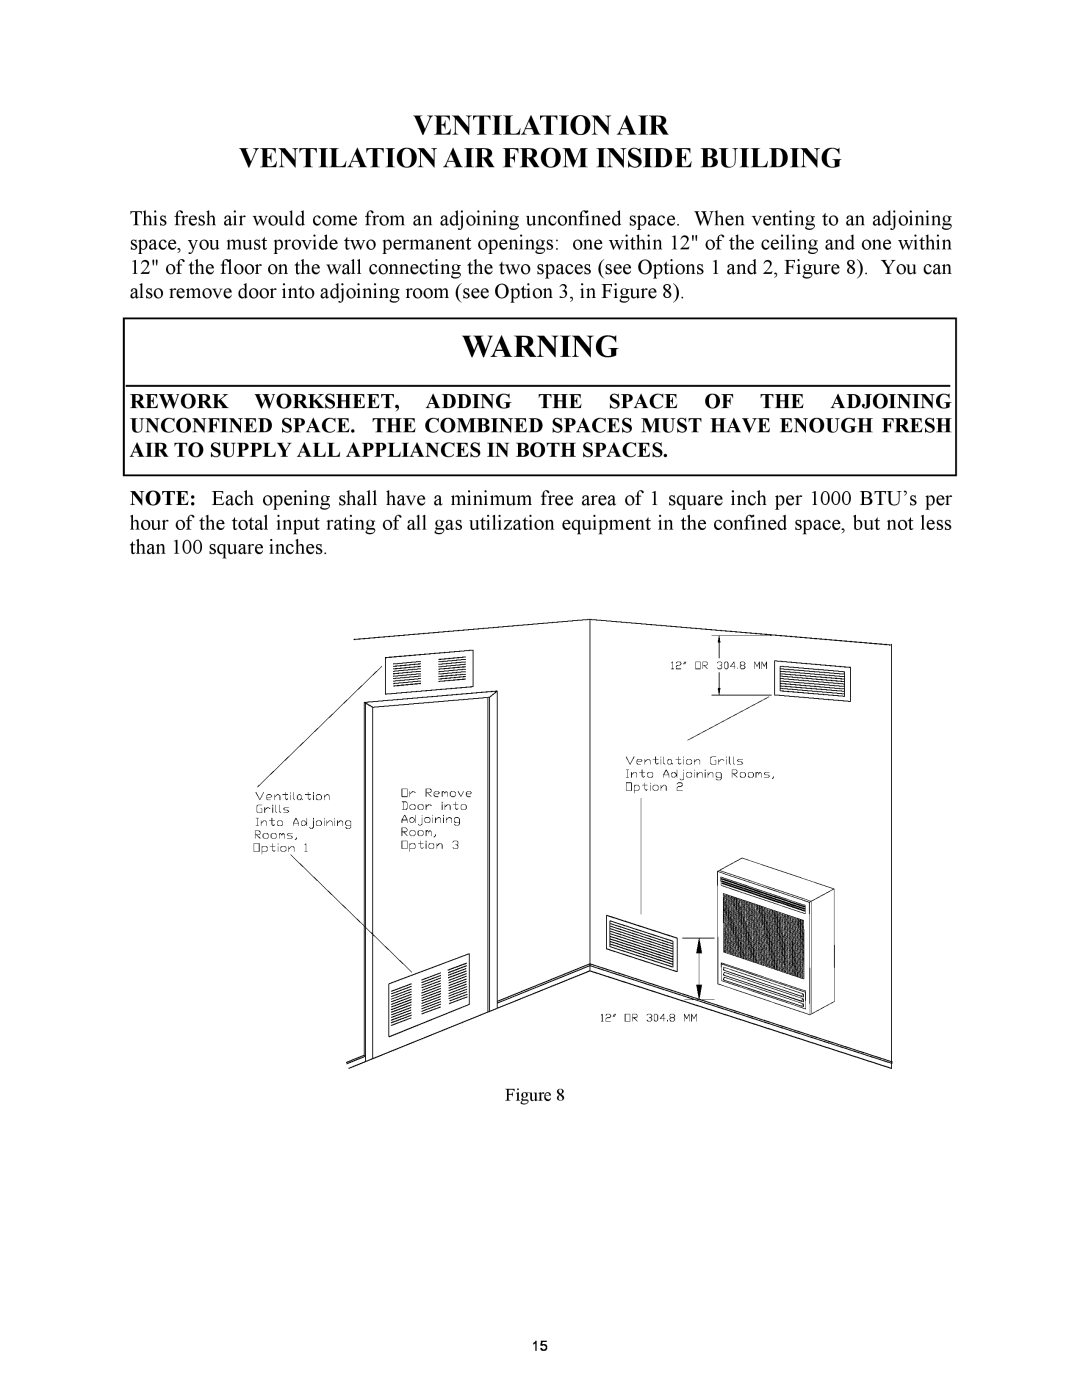 New Buck Corporation 1110 manual Ventilation Air From Inside Building 